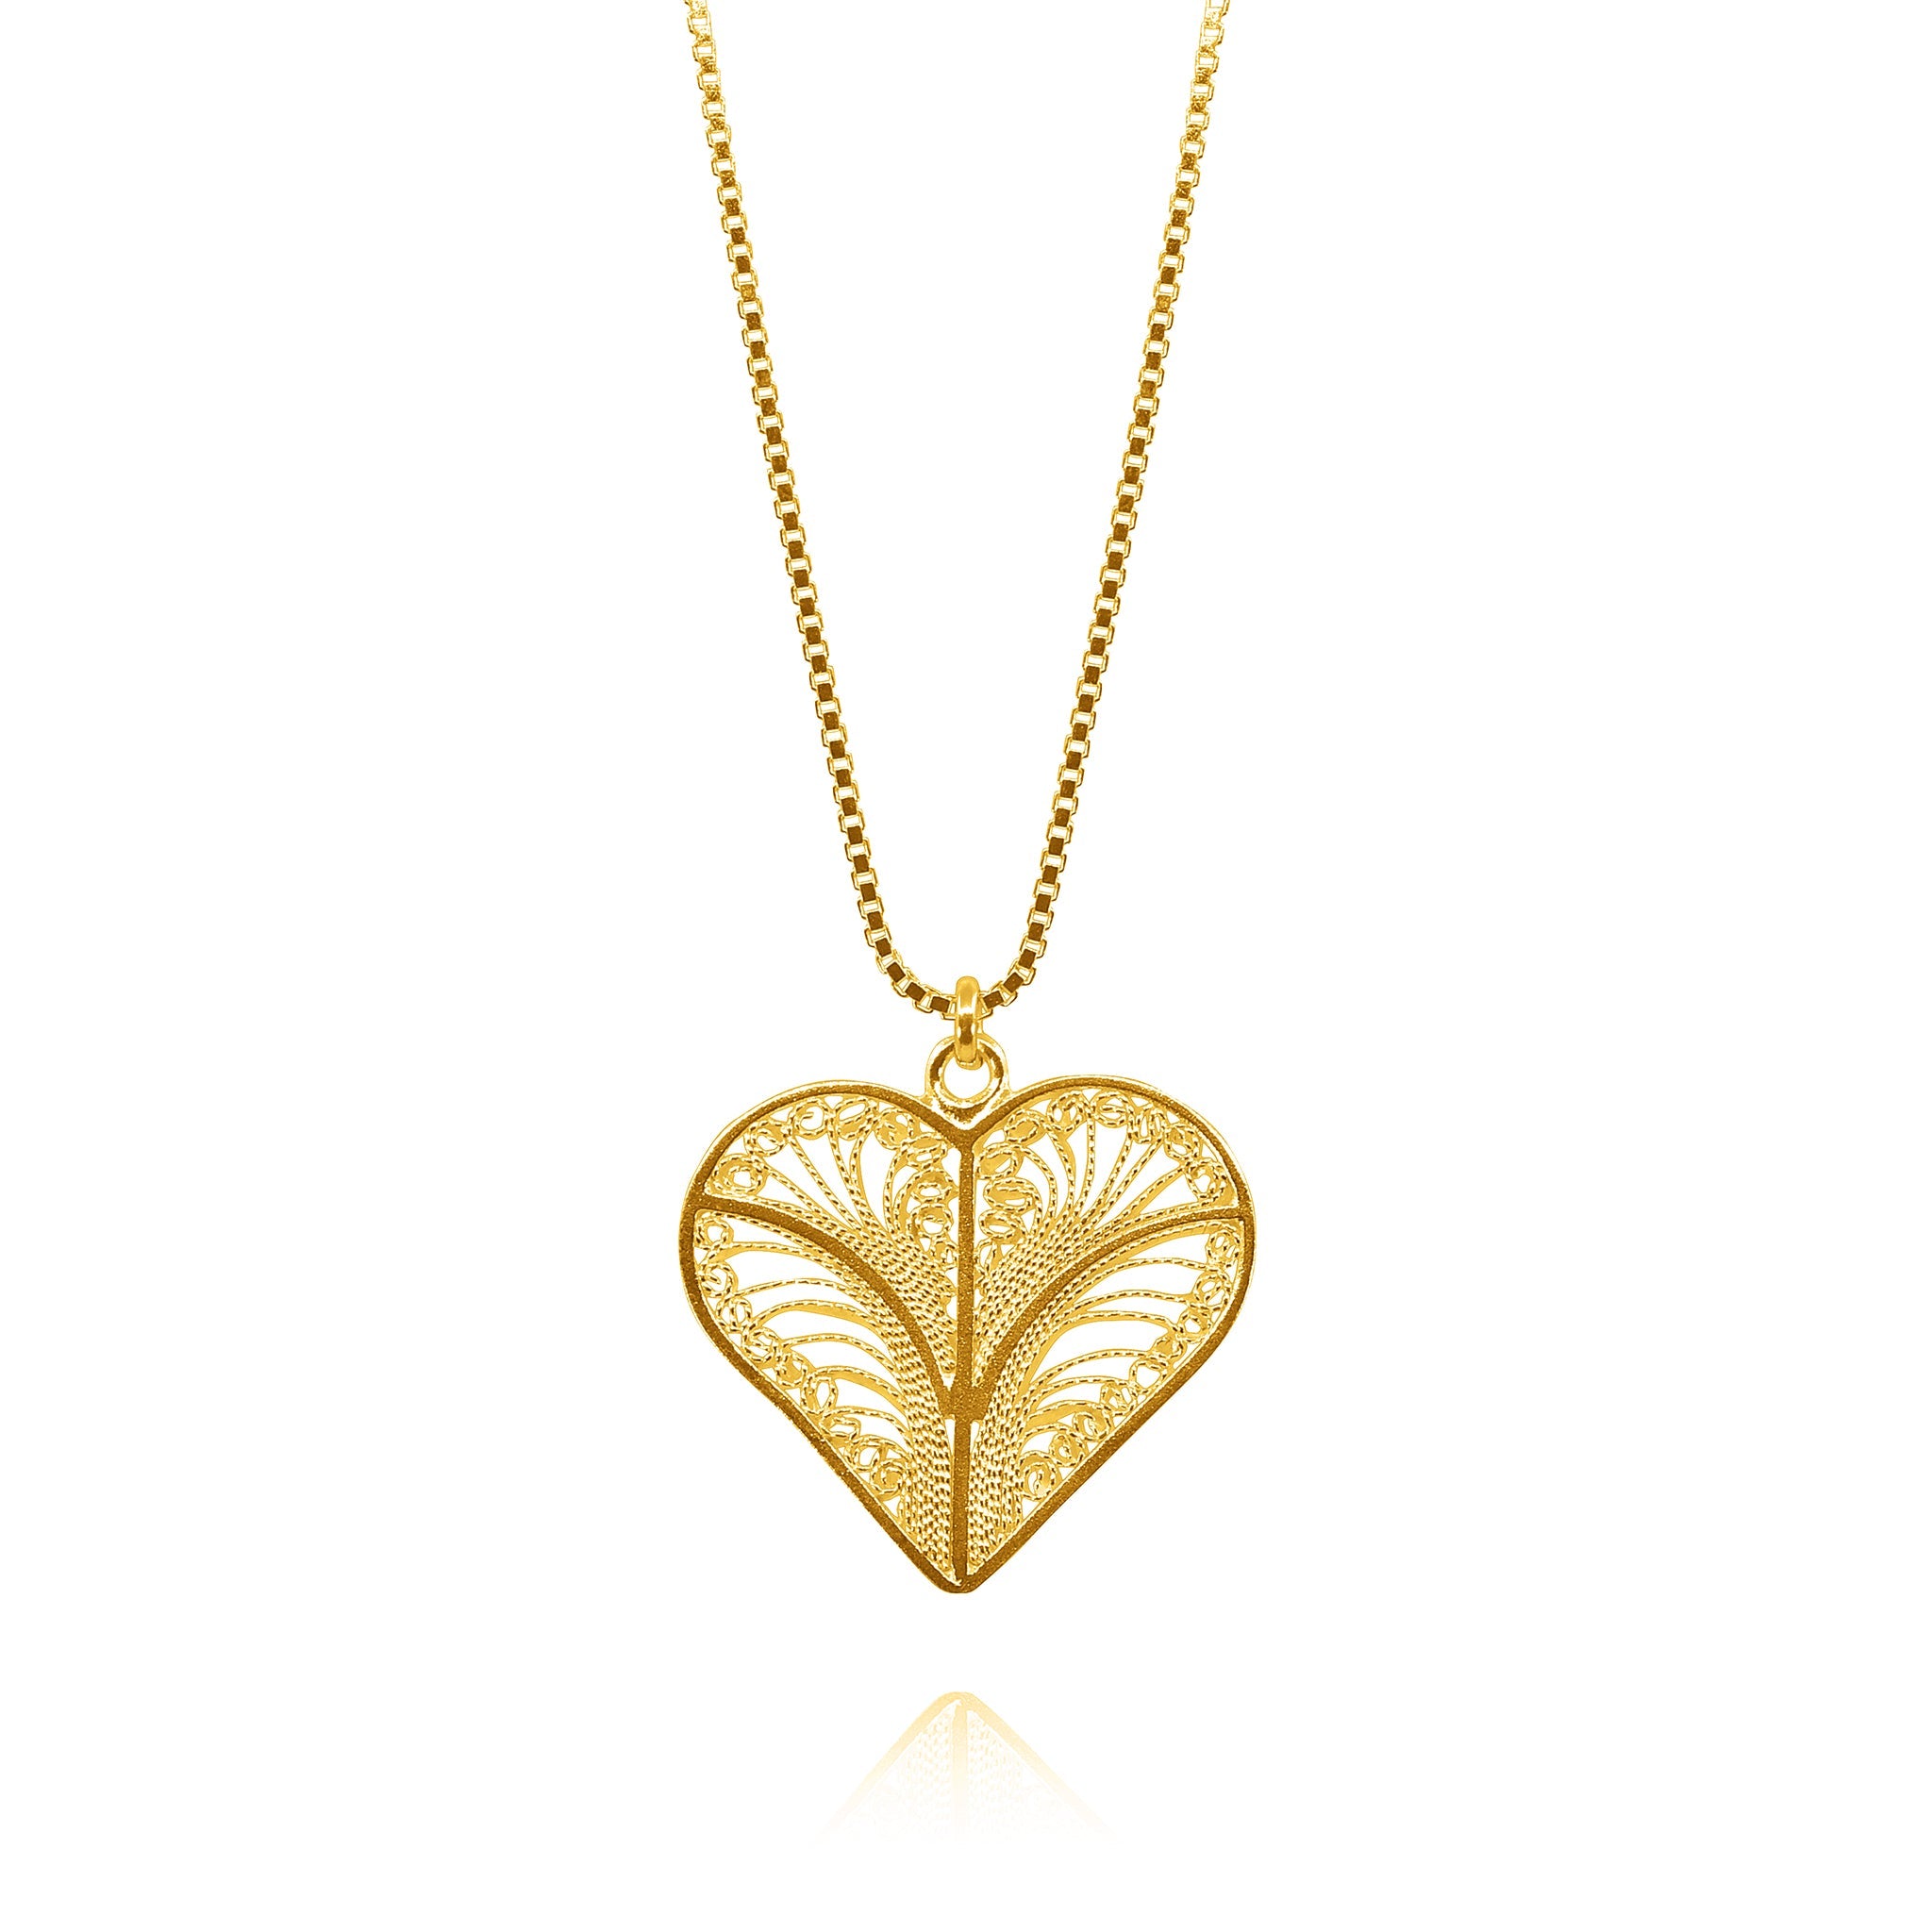 KYLIE GOLD HEARTS SMALL PENDANT NECKLACE FILIGREE